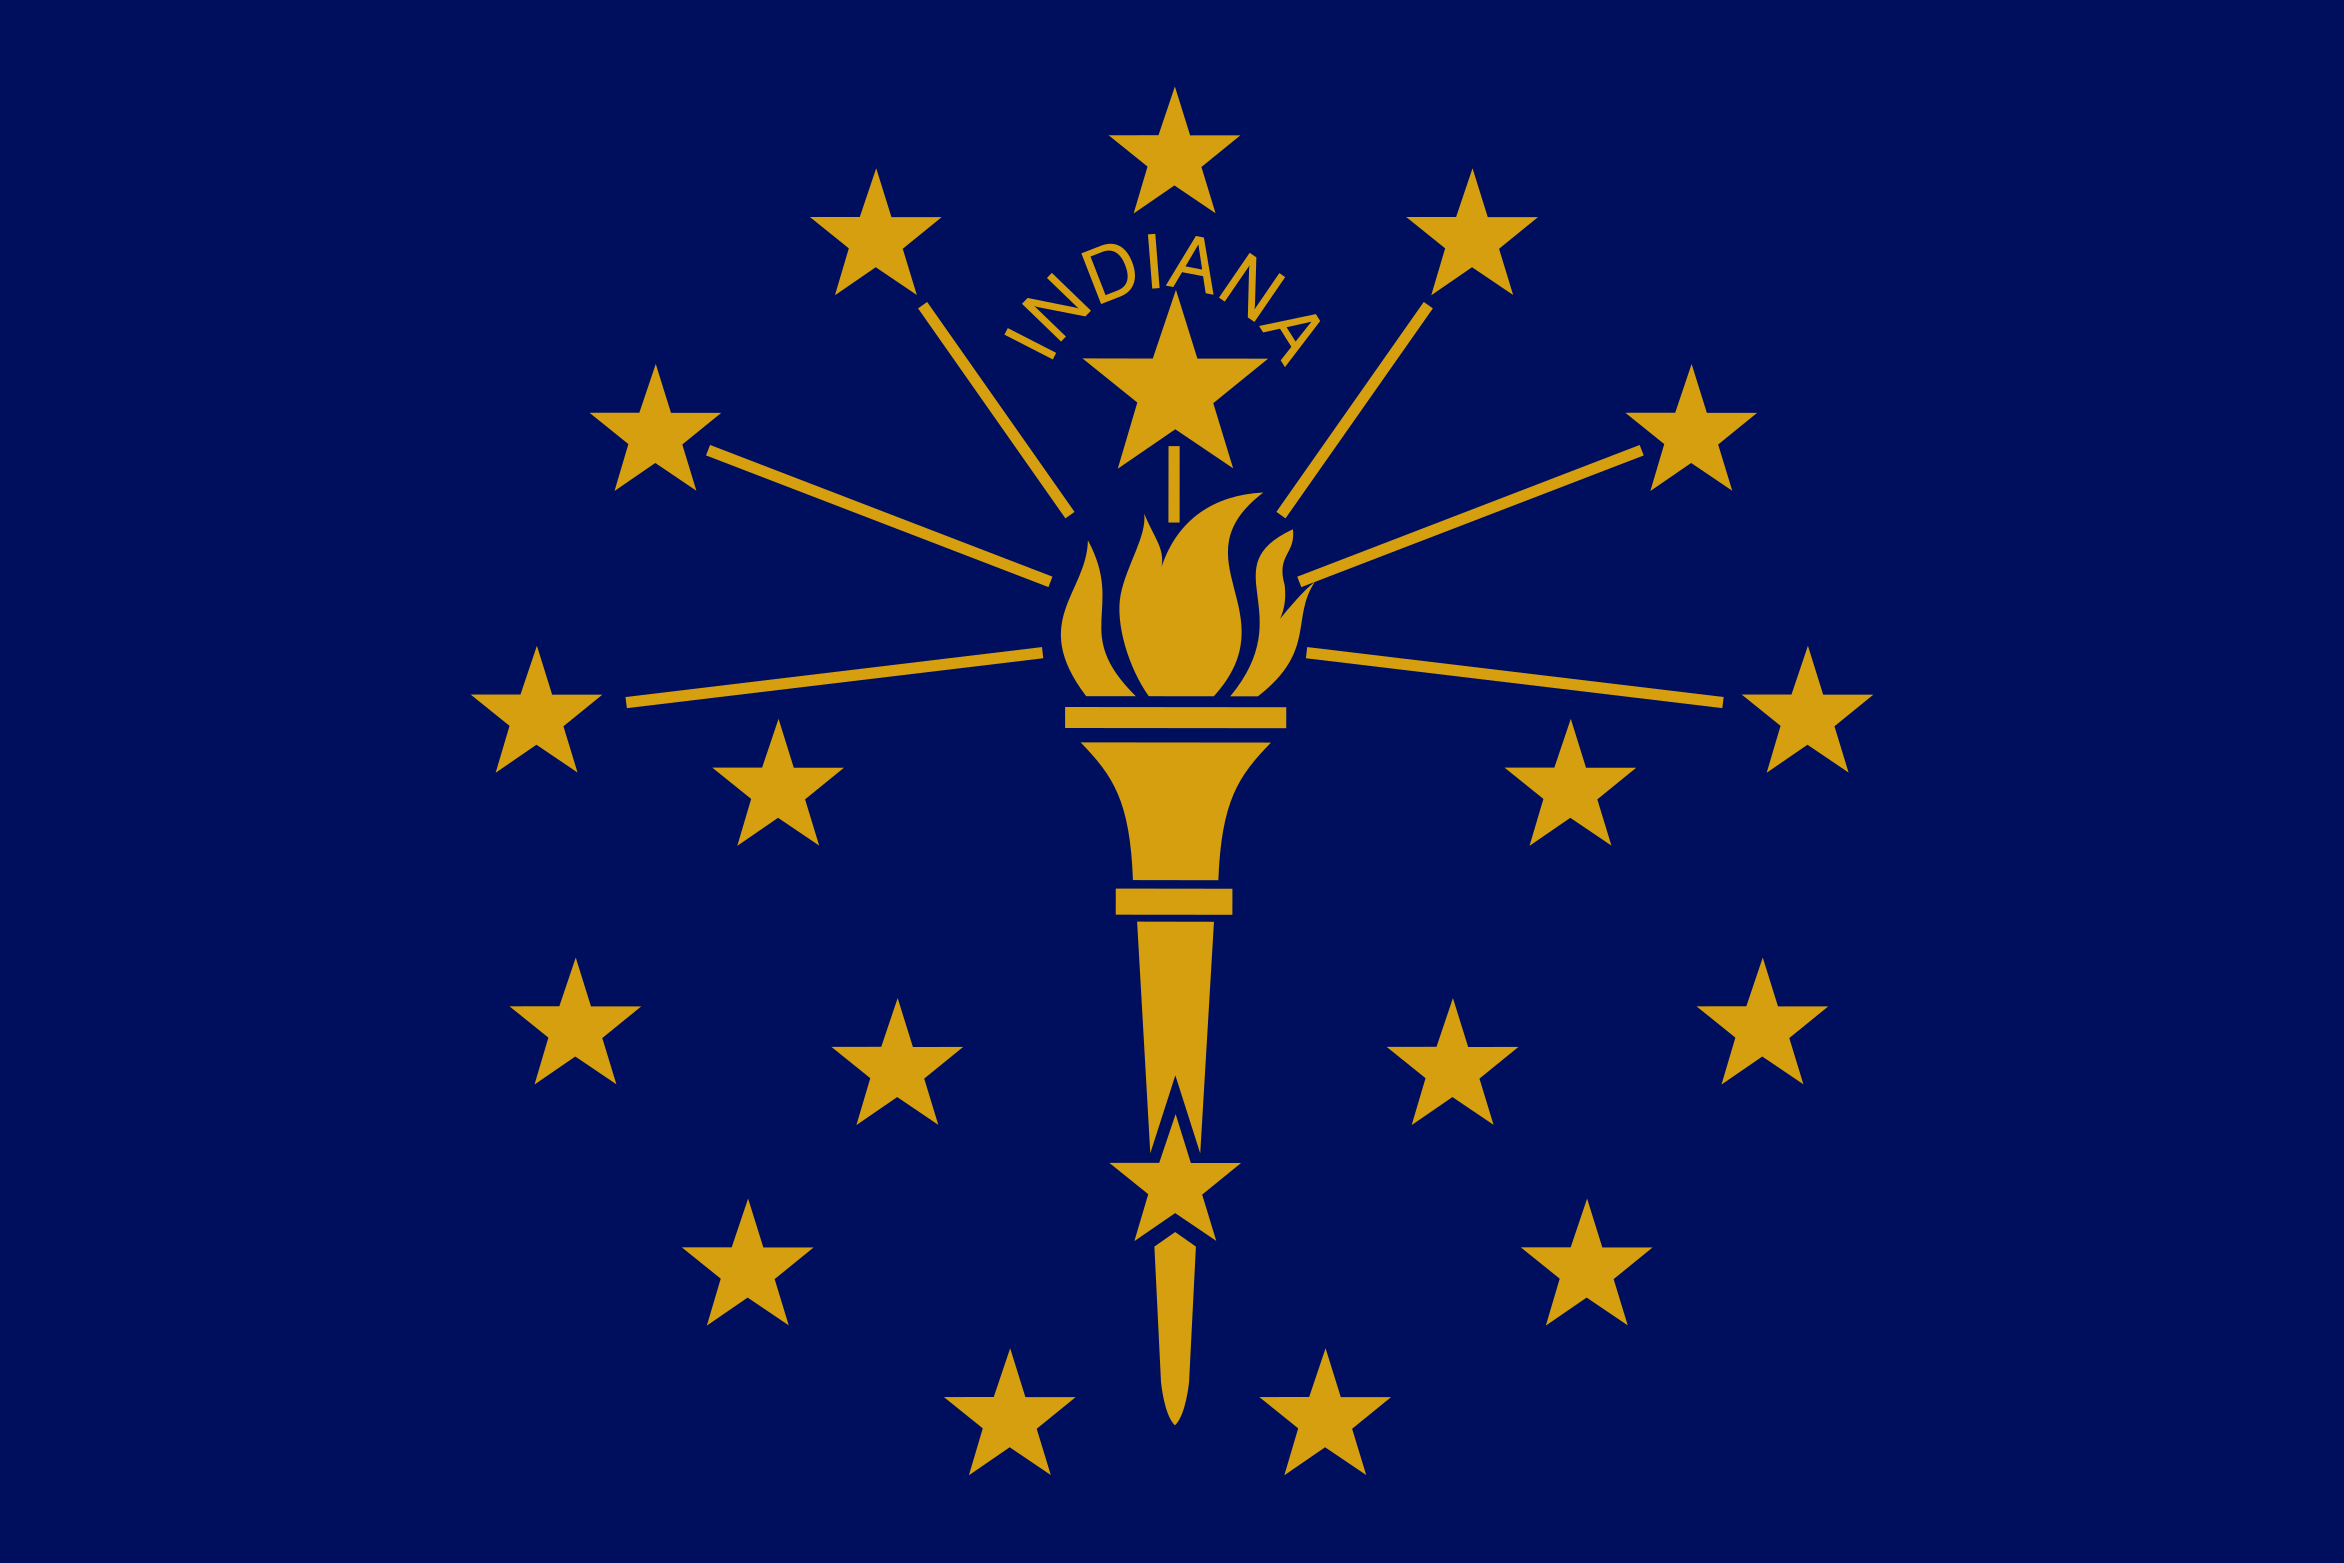 Free Indiana Flag Images: AI, EPS, GIF, JPG, PDF, PNG, SVG and more!